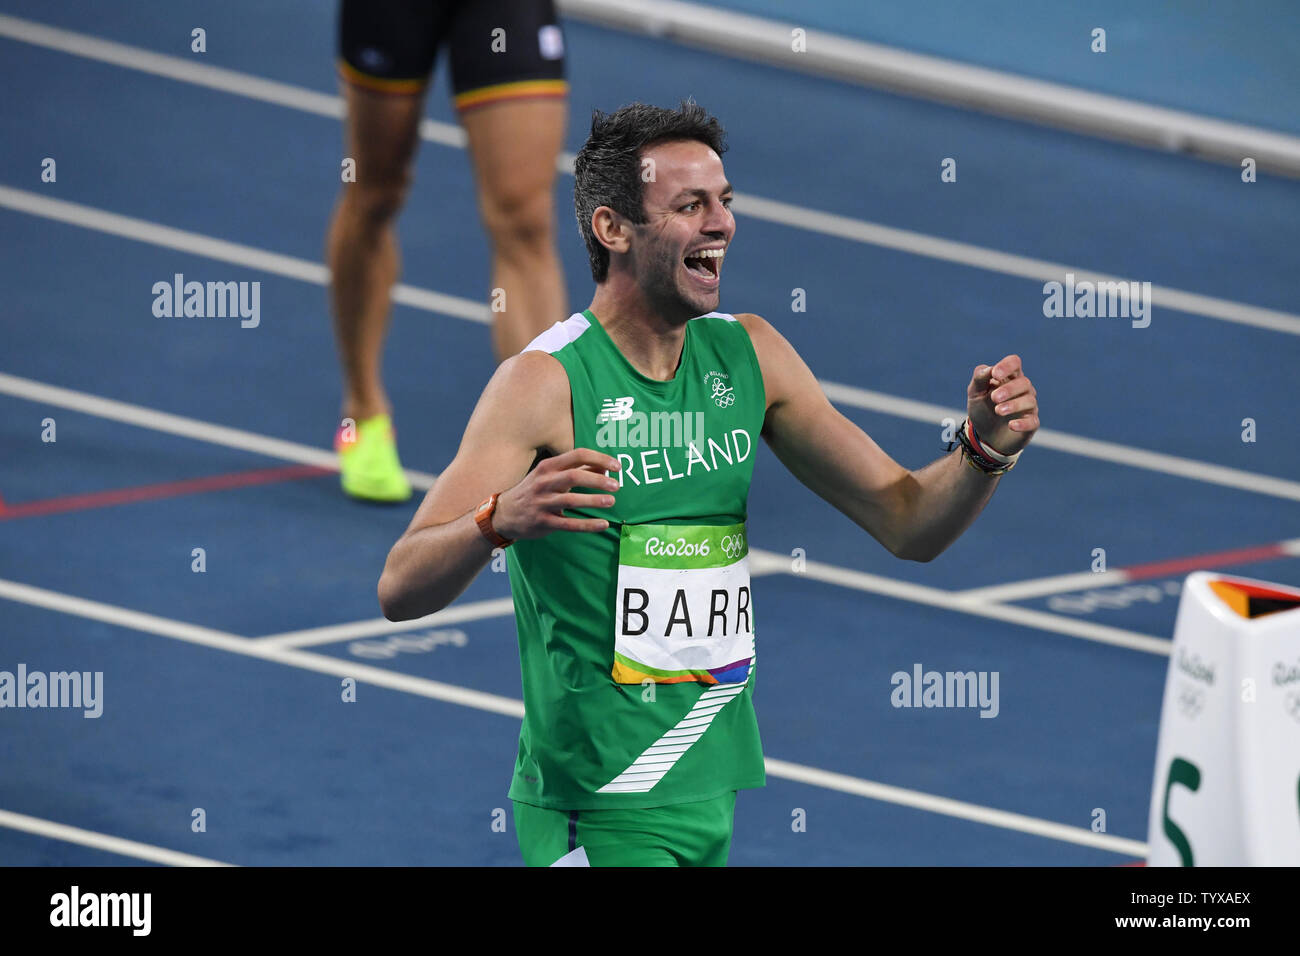 Thomas Barr of Ireland, reacts after winning the Men's 400m Hurdles Semifinal 3 in the Olympic Stadium at the 2016 Rio Summer Olympics in Rio de Janeiro, Brazil, on August 16, 2016.  Barr won the semifinal with a time of 48.39.      Photo by Richard Ellis/UPI Stock Photo